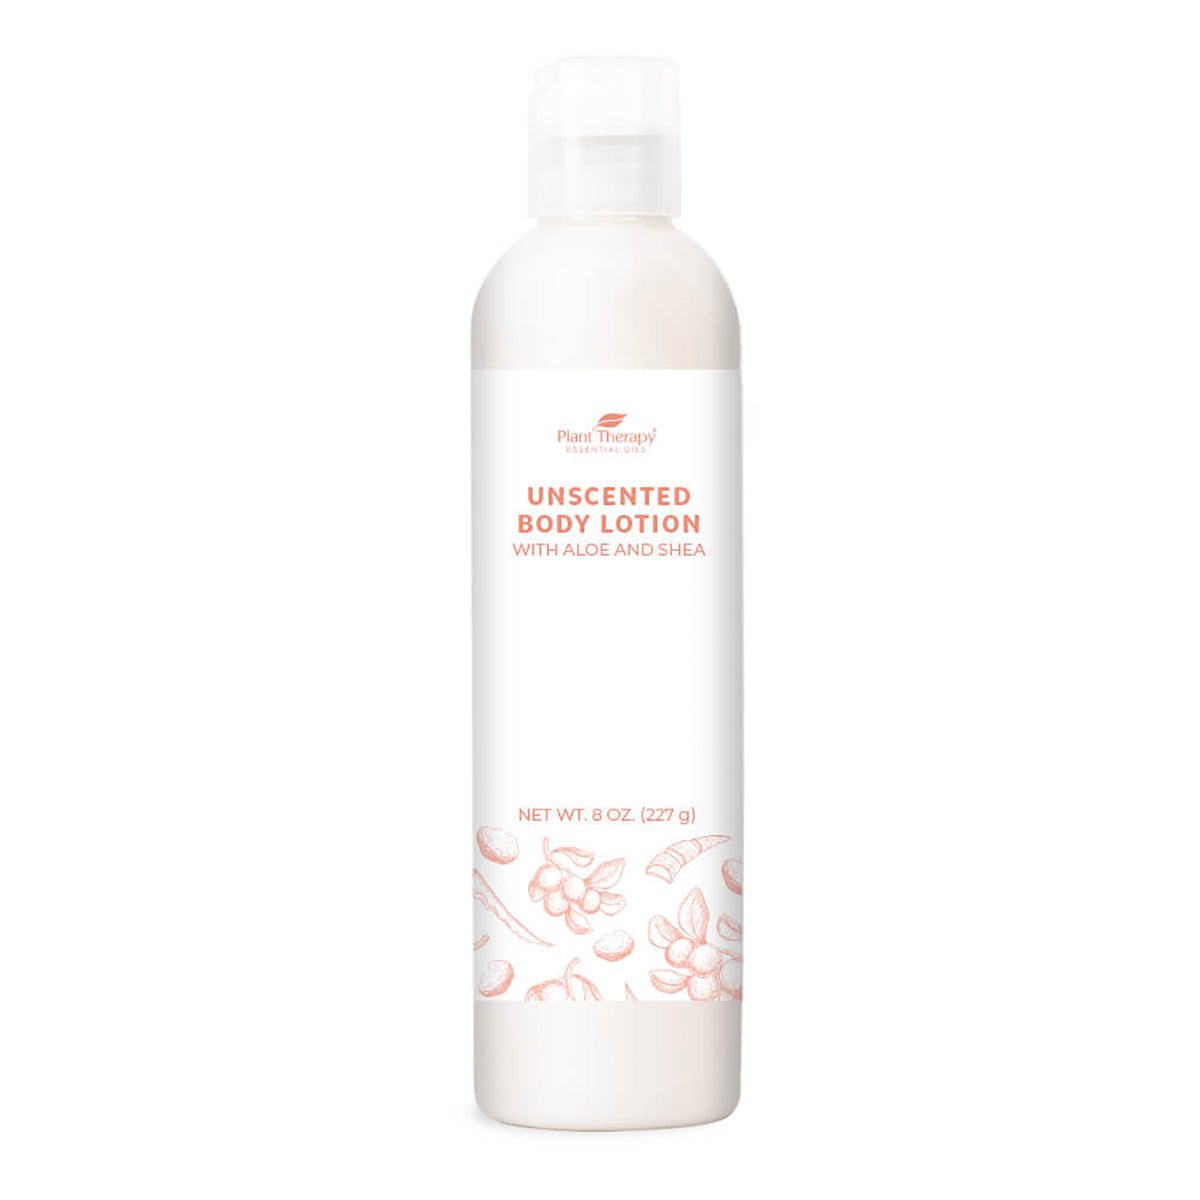 Unscented Body Lotion with Aloe and Shea